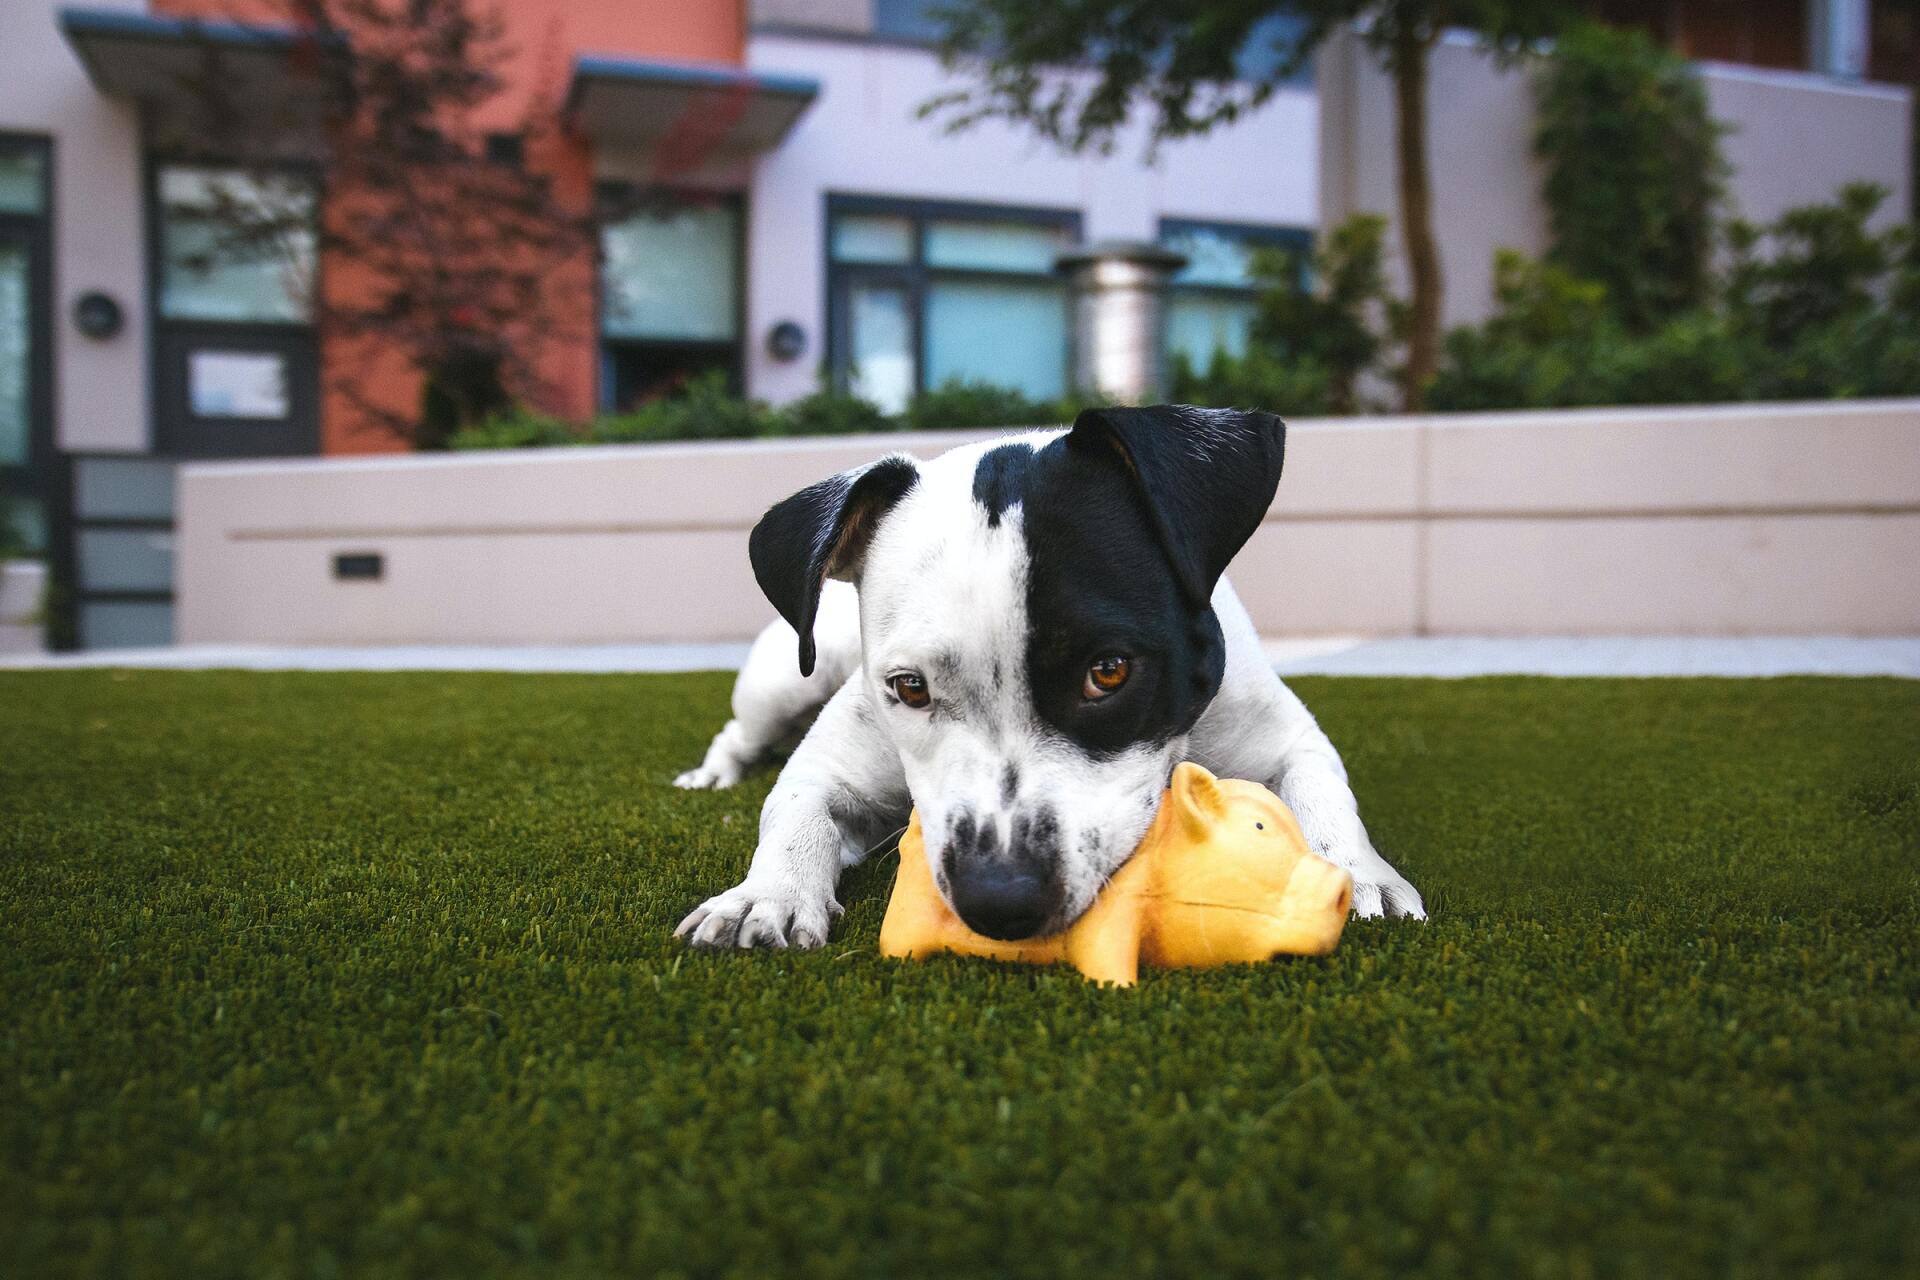 This dog is happily playing with its toy in this newly installed pet turf by the pros at Scottsdale Artificial Turf